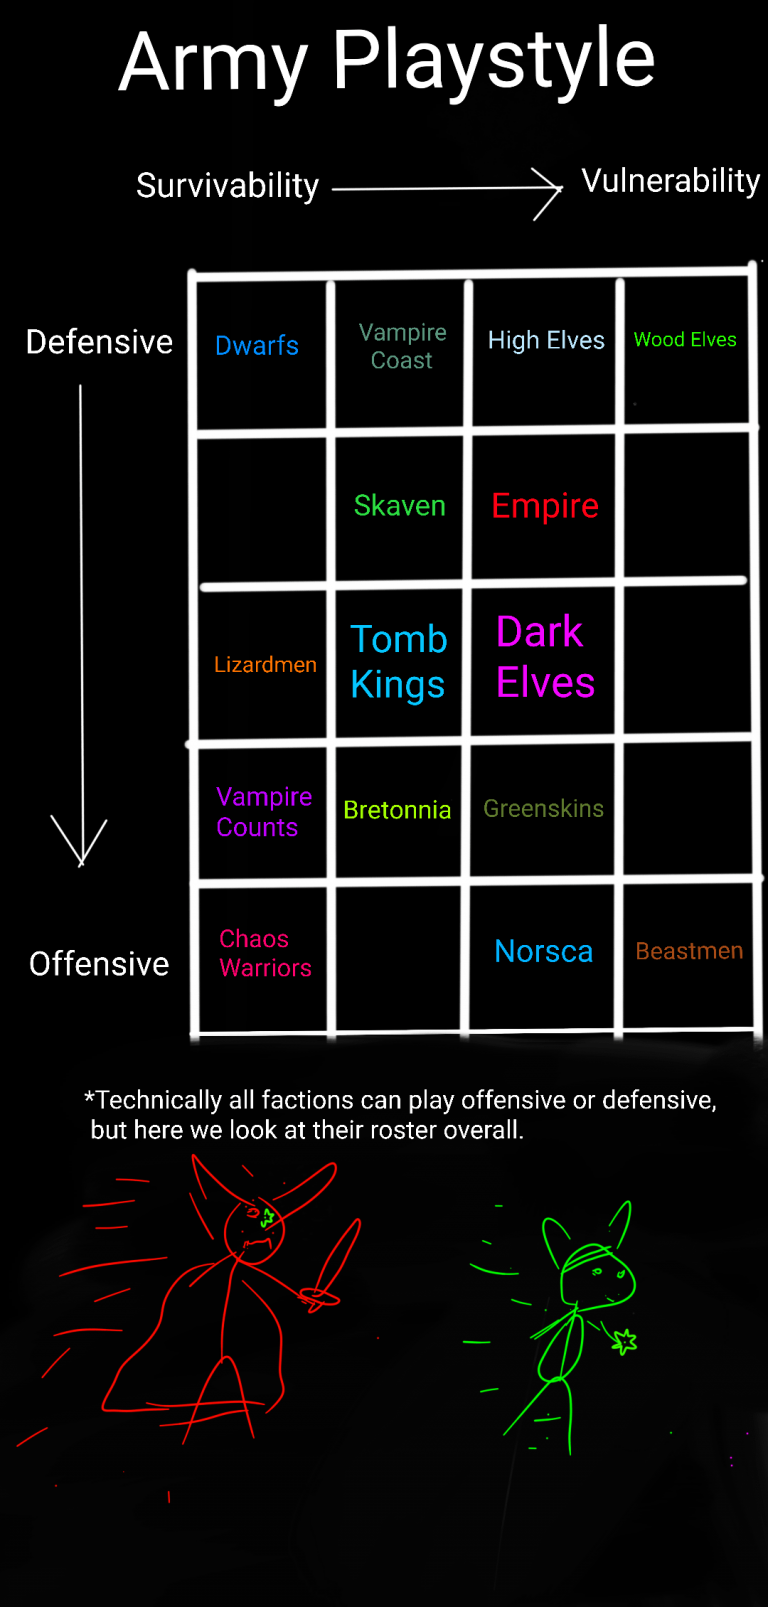 What Faction Is Best For A Defensive Playstyle In Warhammer 40K?